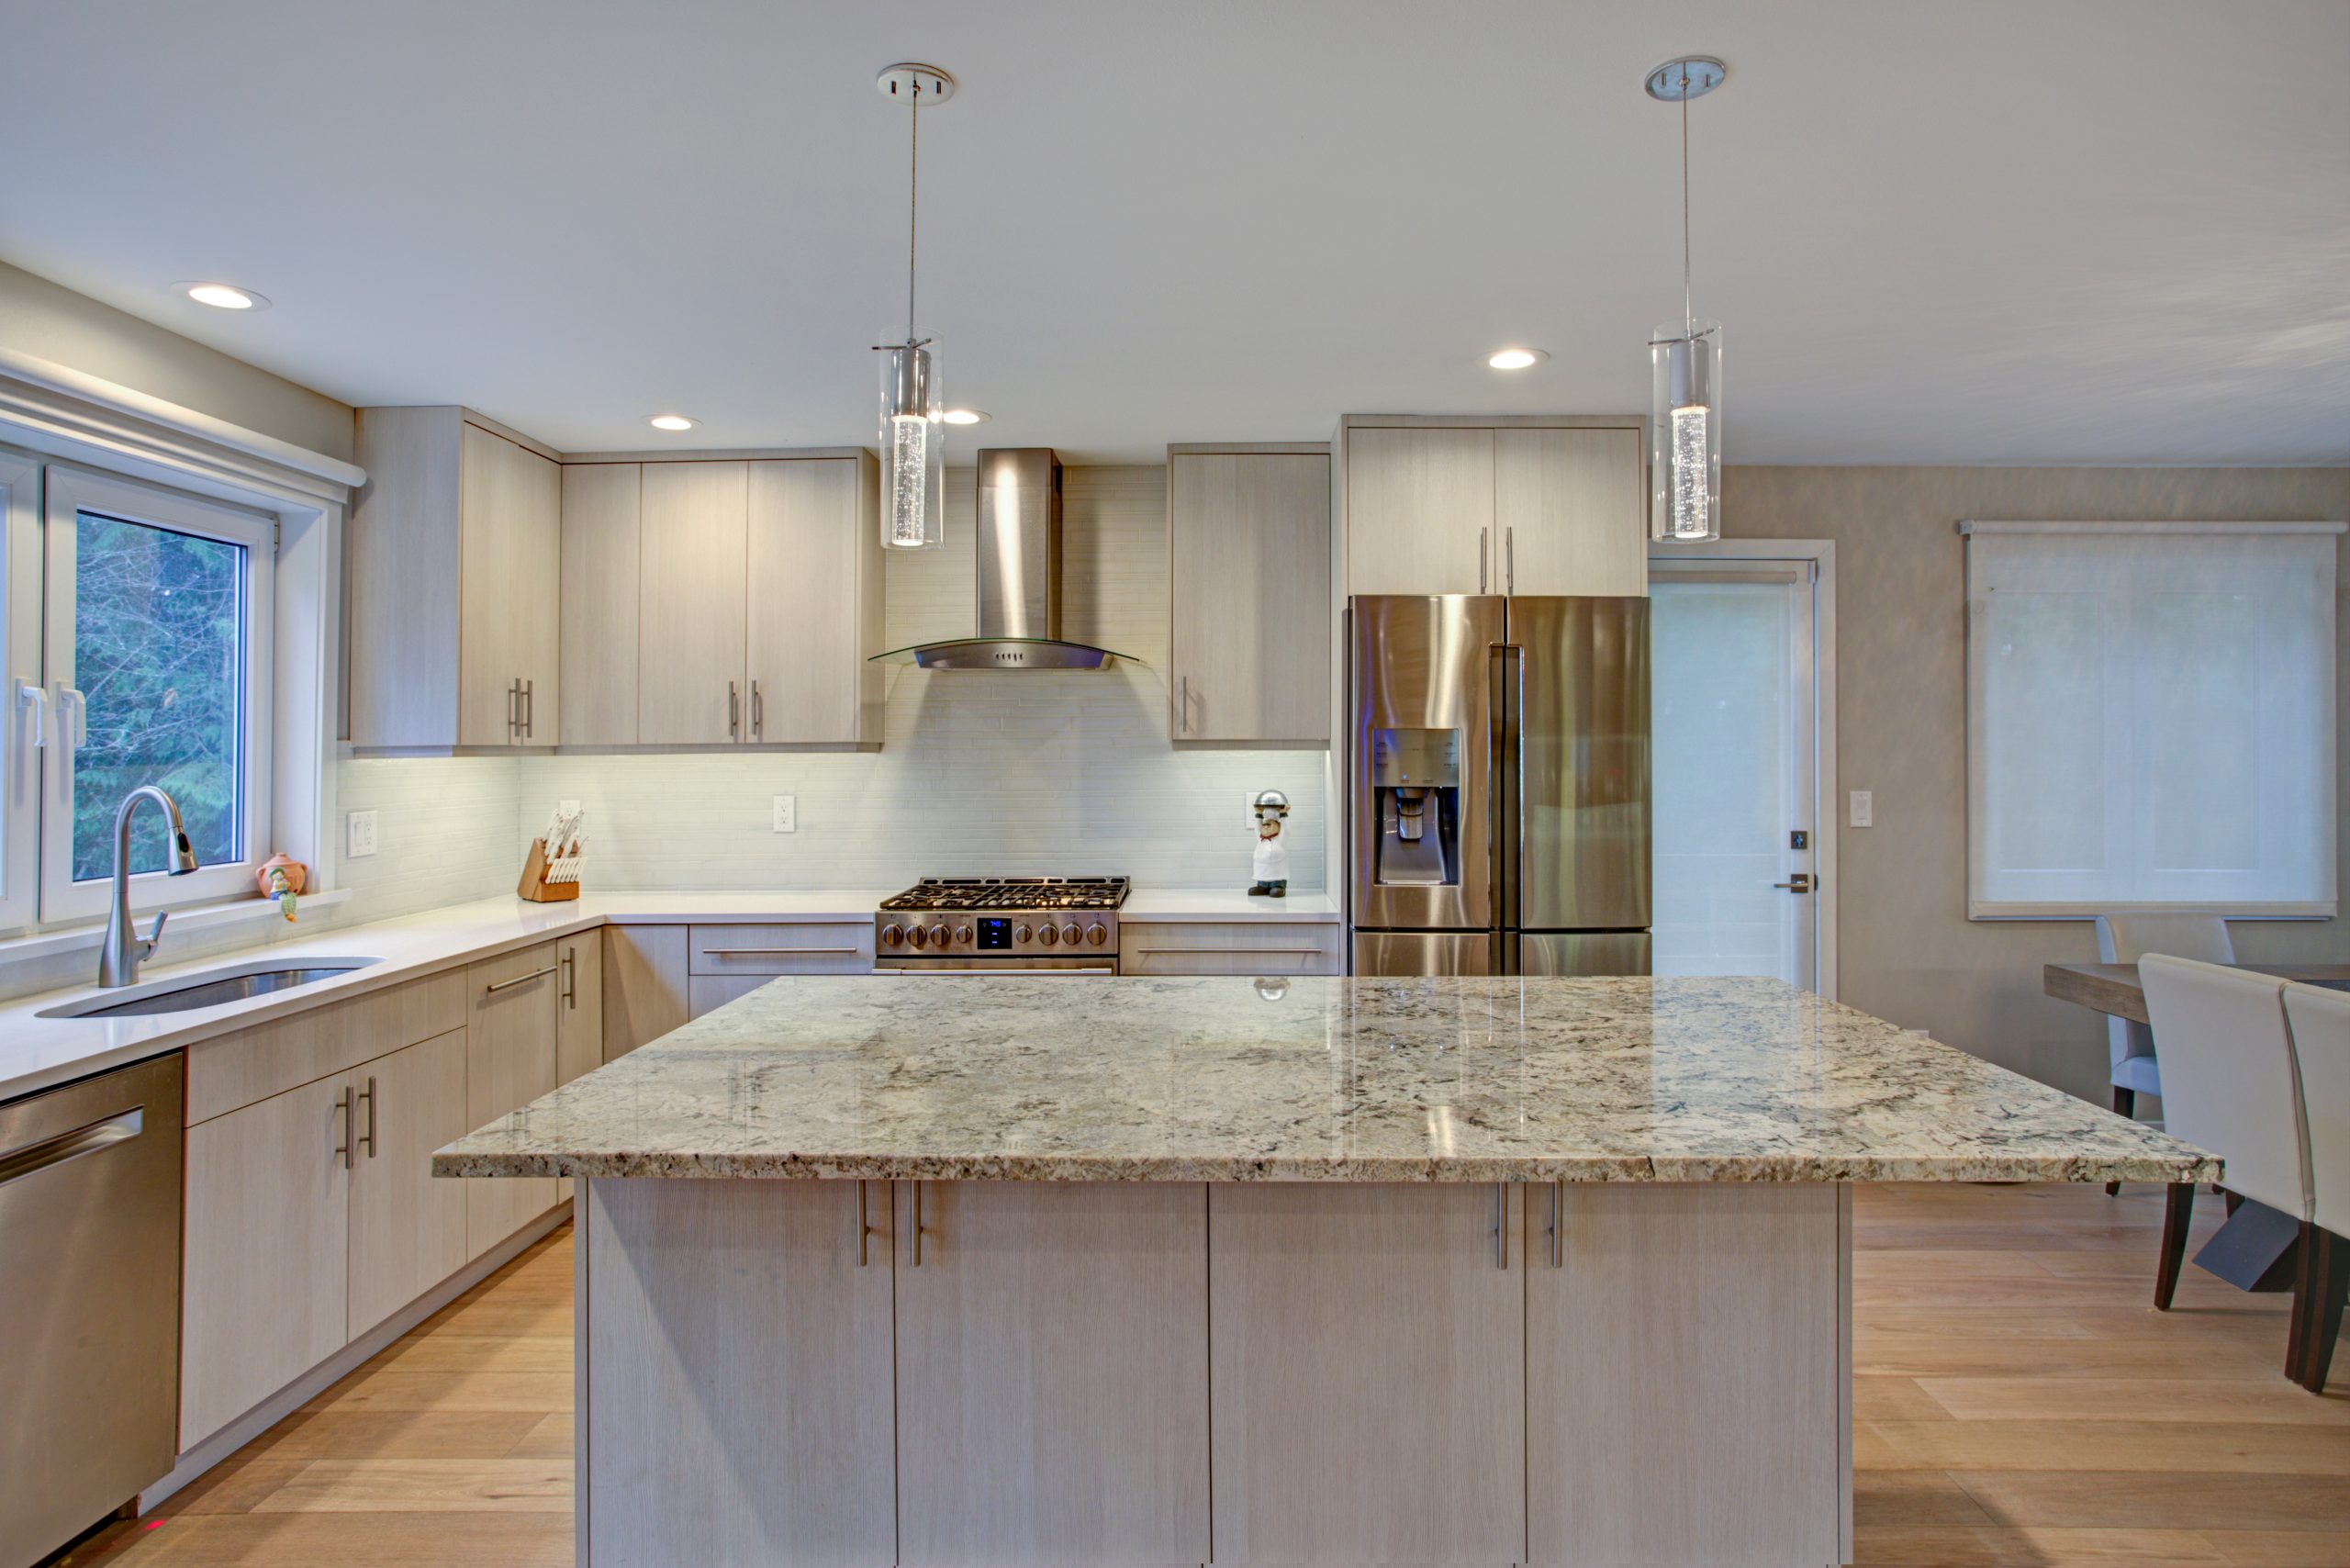 Upgrade Your Kitchen with These Top Statement Countertops